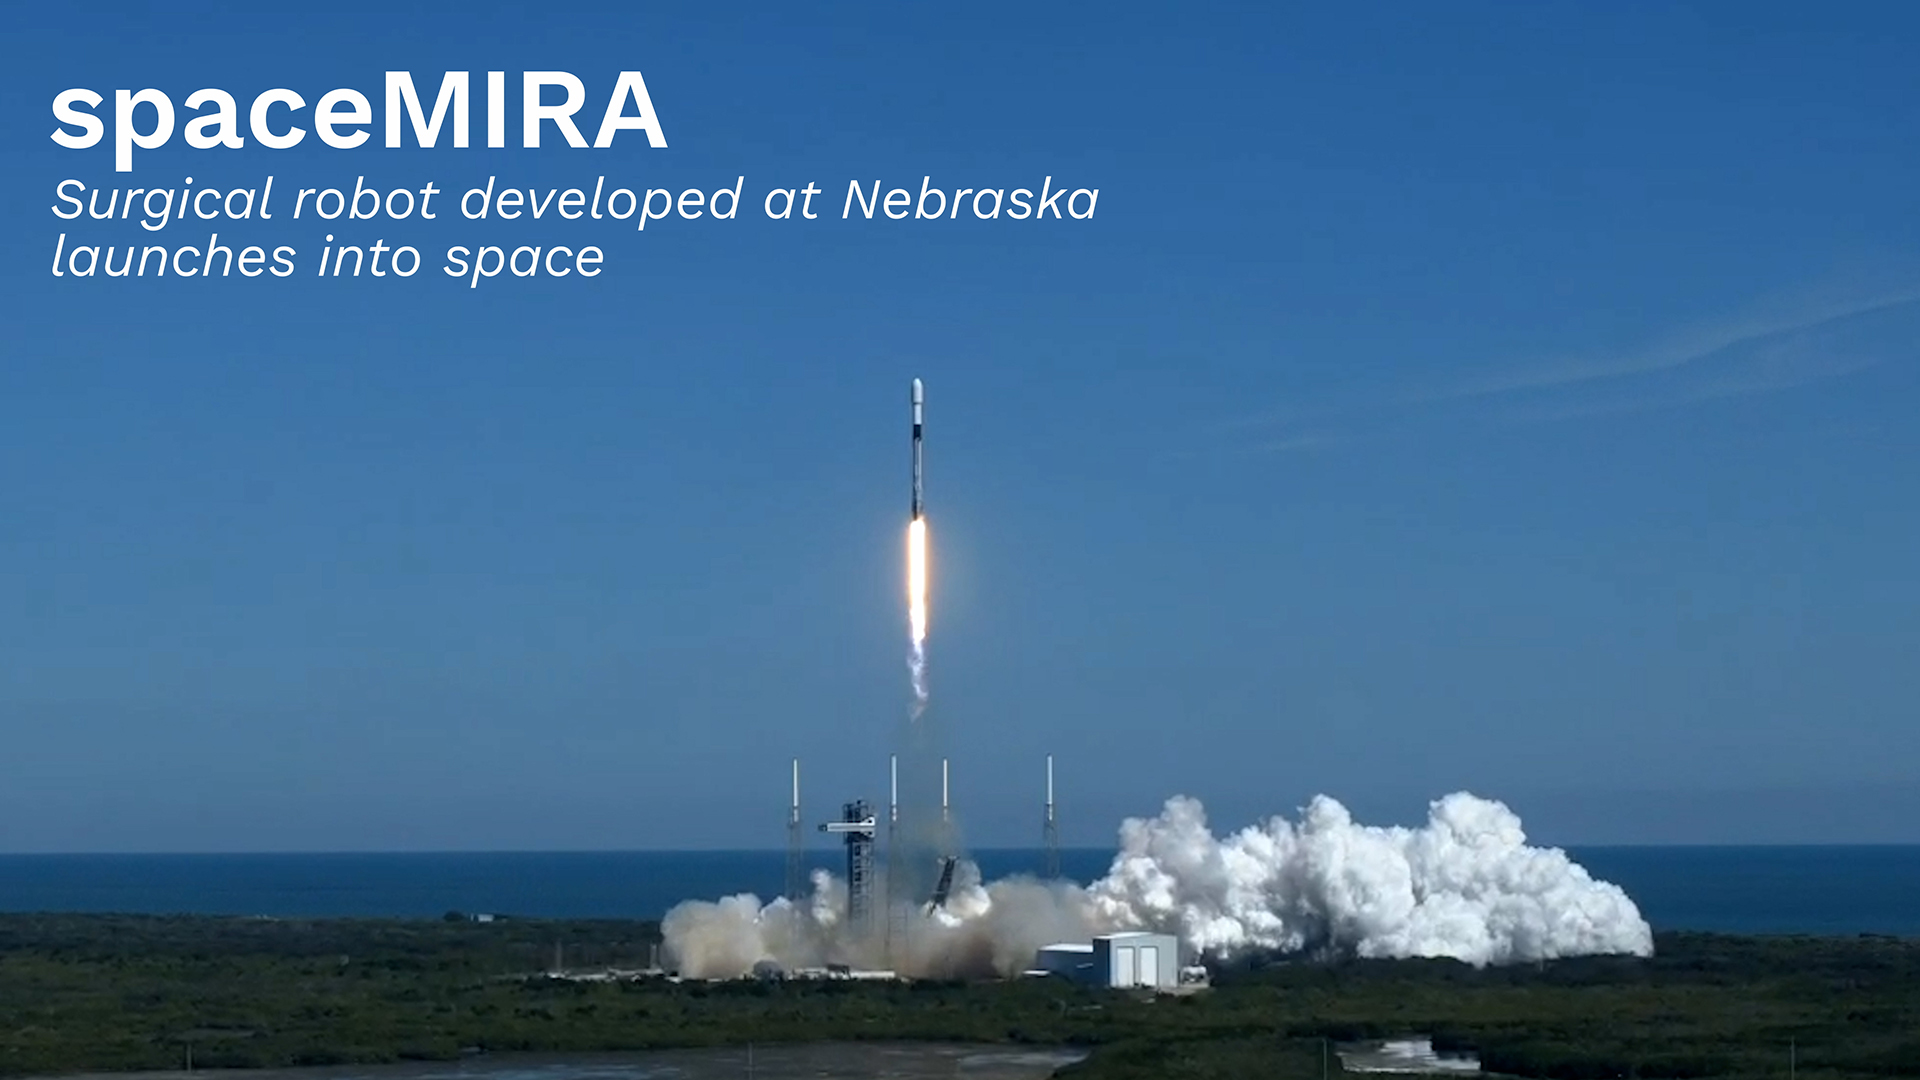 spaceMIRA: Surgical robot developed at Nebraska launches into space